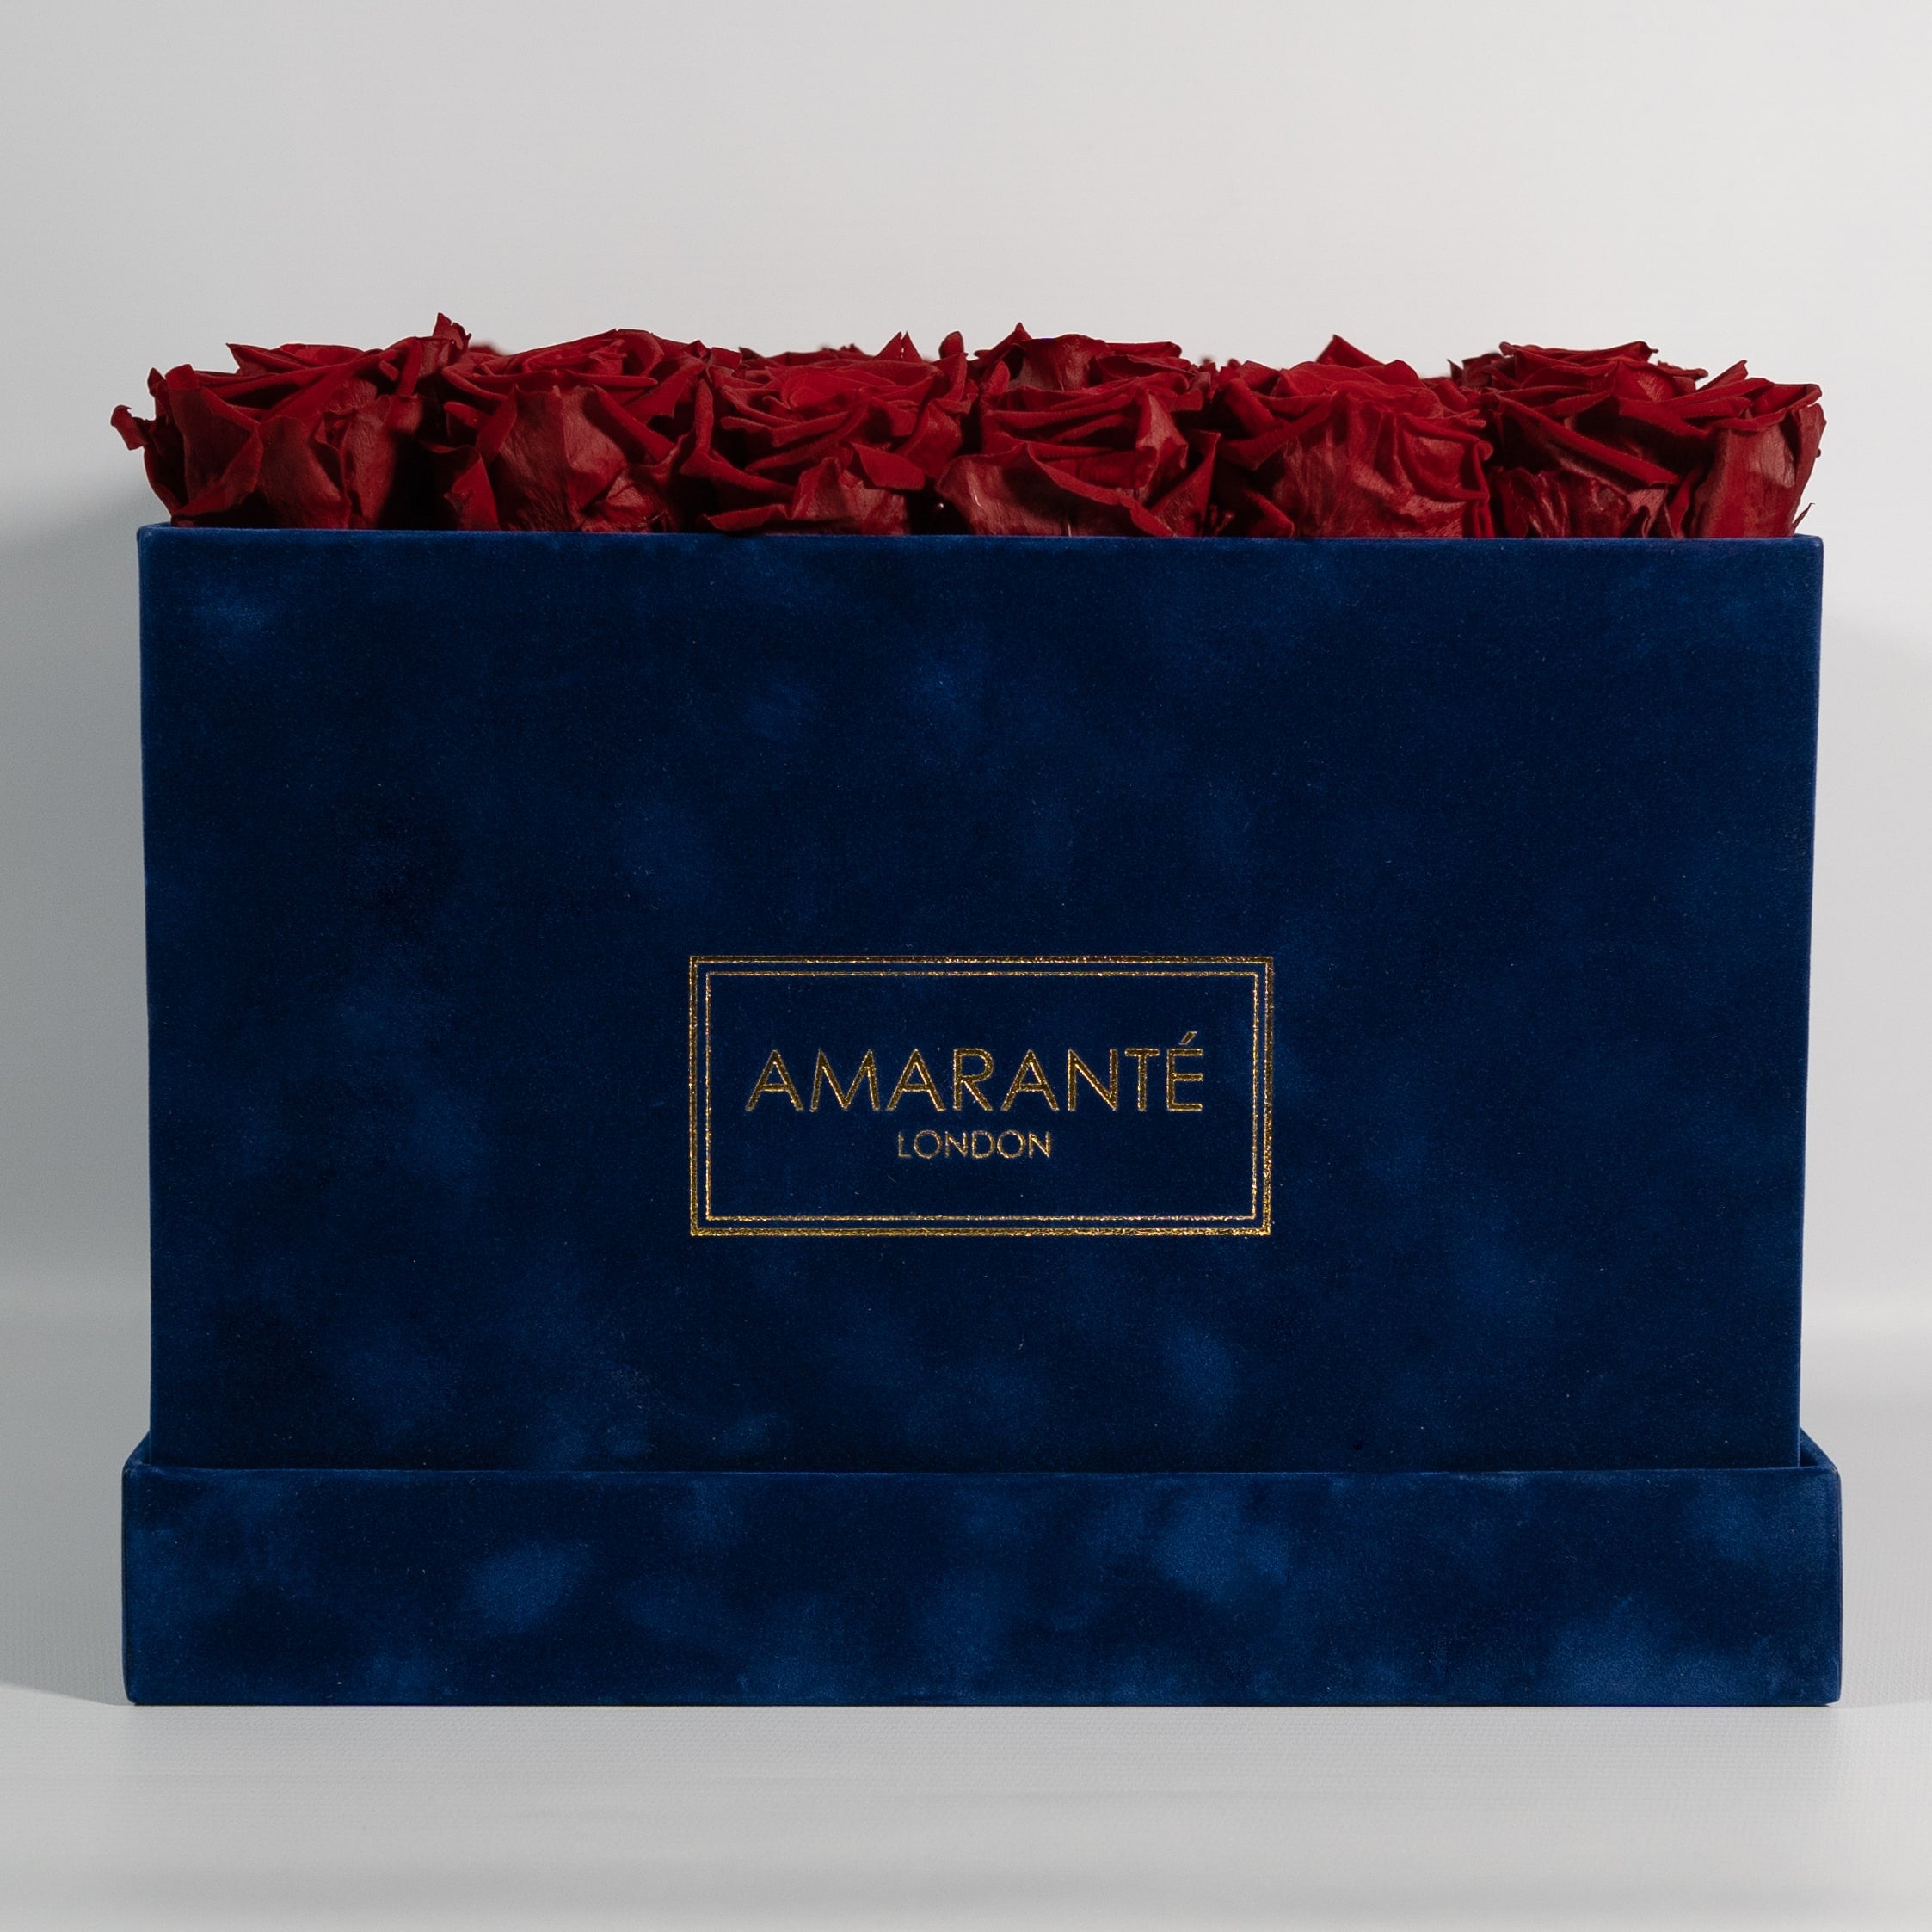 Fragrant red roses, ideal for representing religious fervours and weddings. 